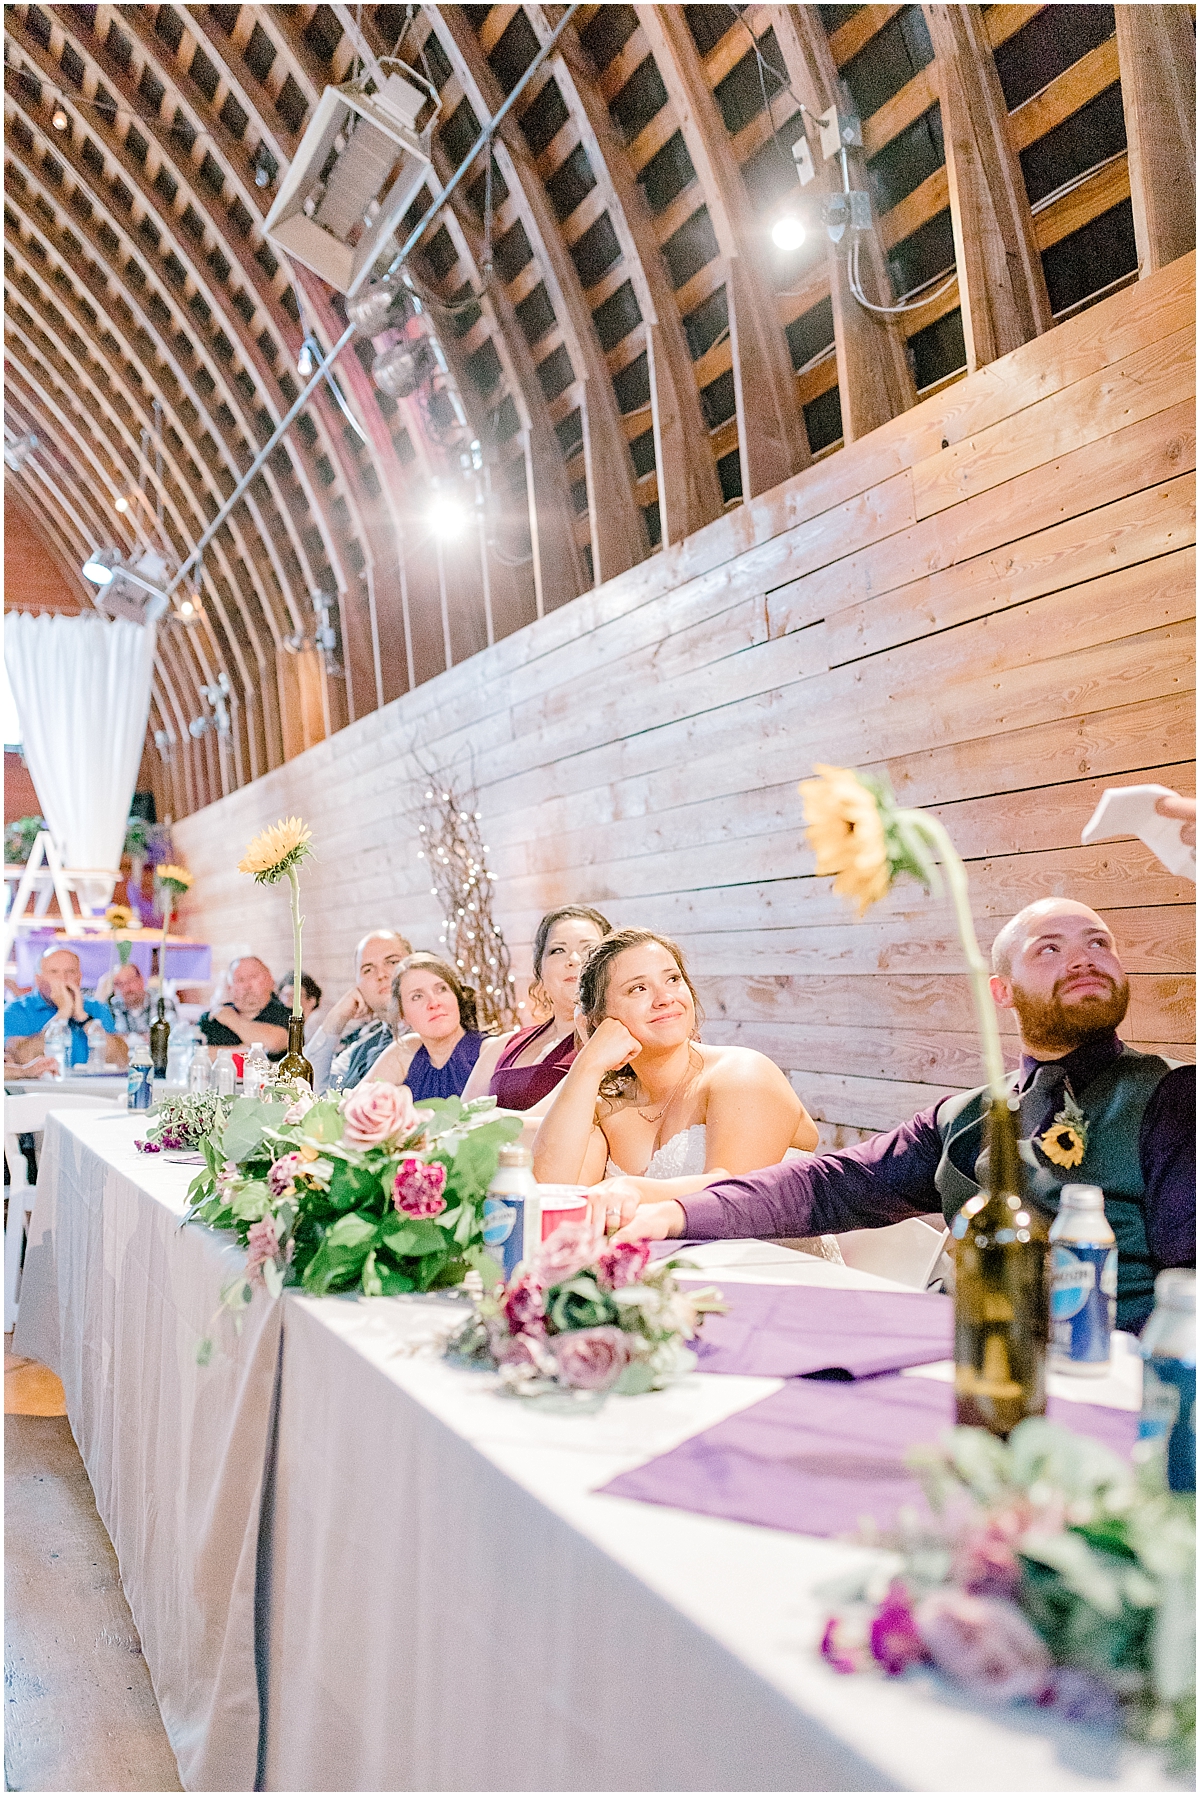 Sunflower themed wedding with purple accents, Emma Rose Company Seattle Wedding Photographer, Light and Airy photographer Kindred Presets Wedding Details PNW_0195.jpg